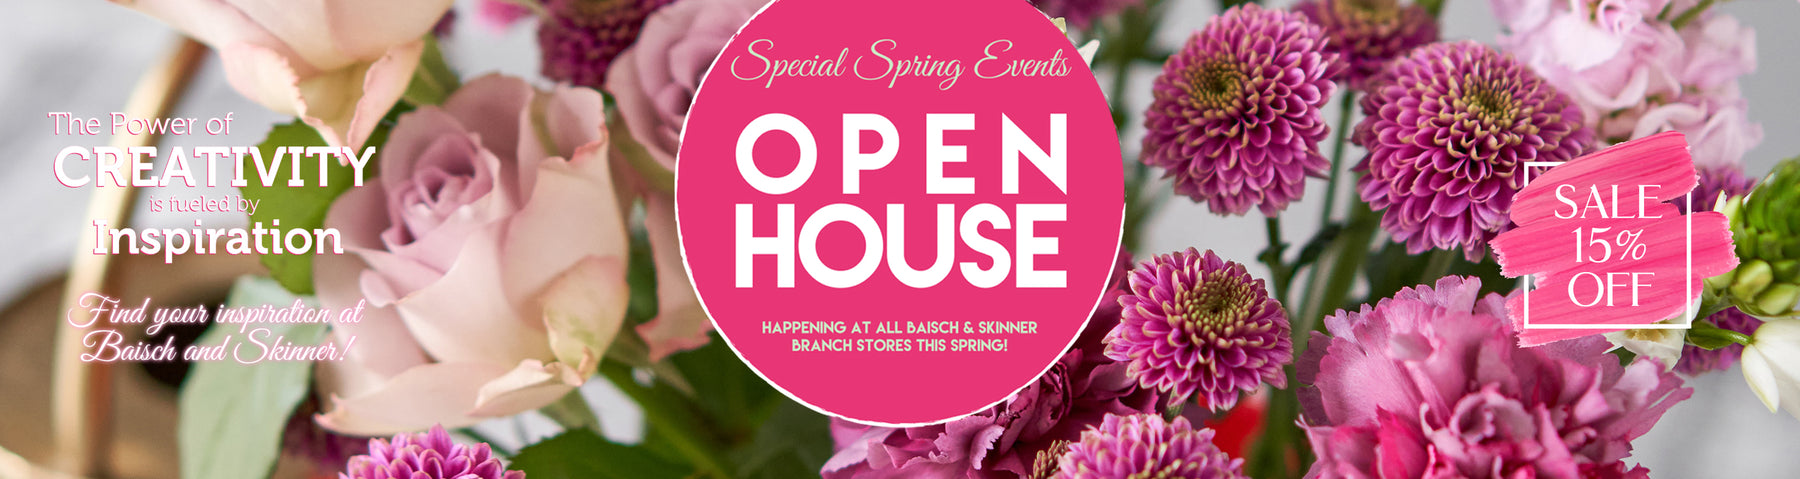 Special Spring Events: Open House